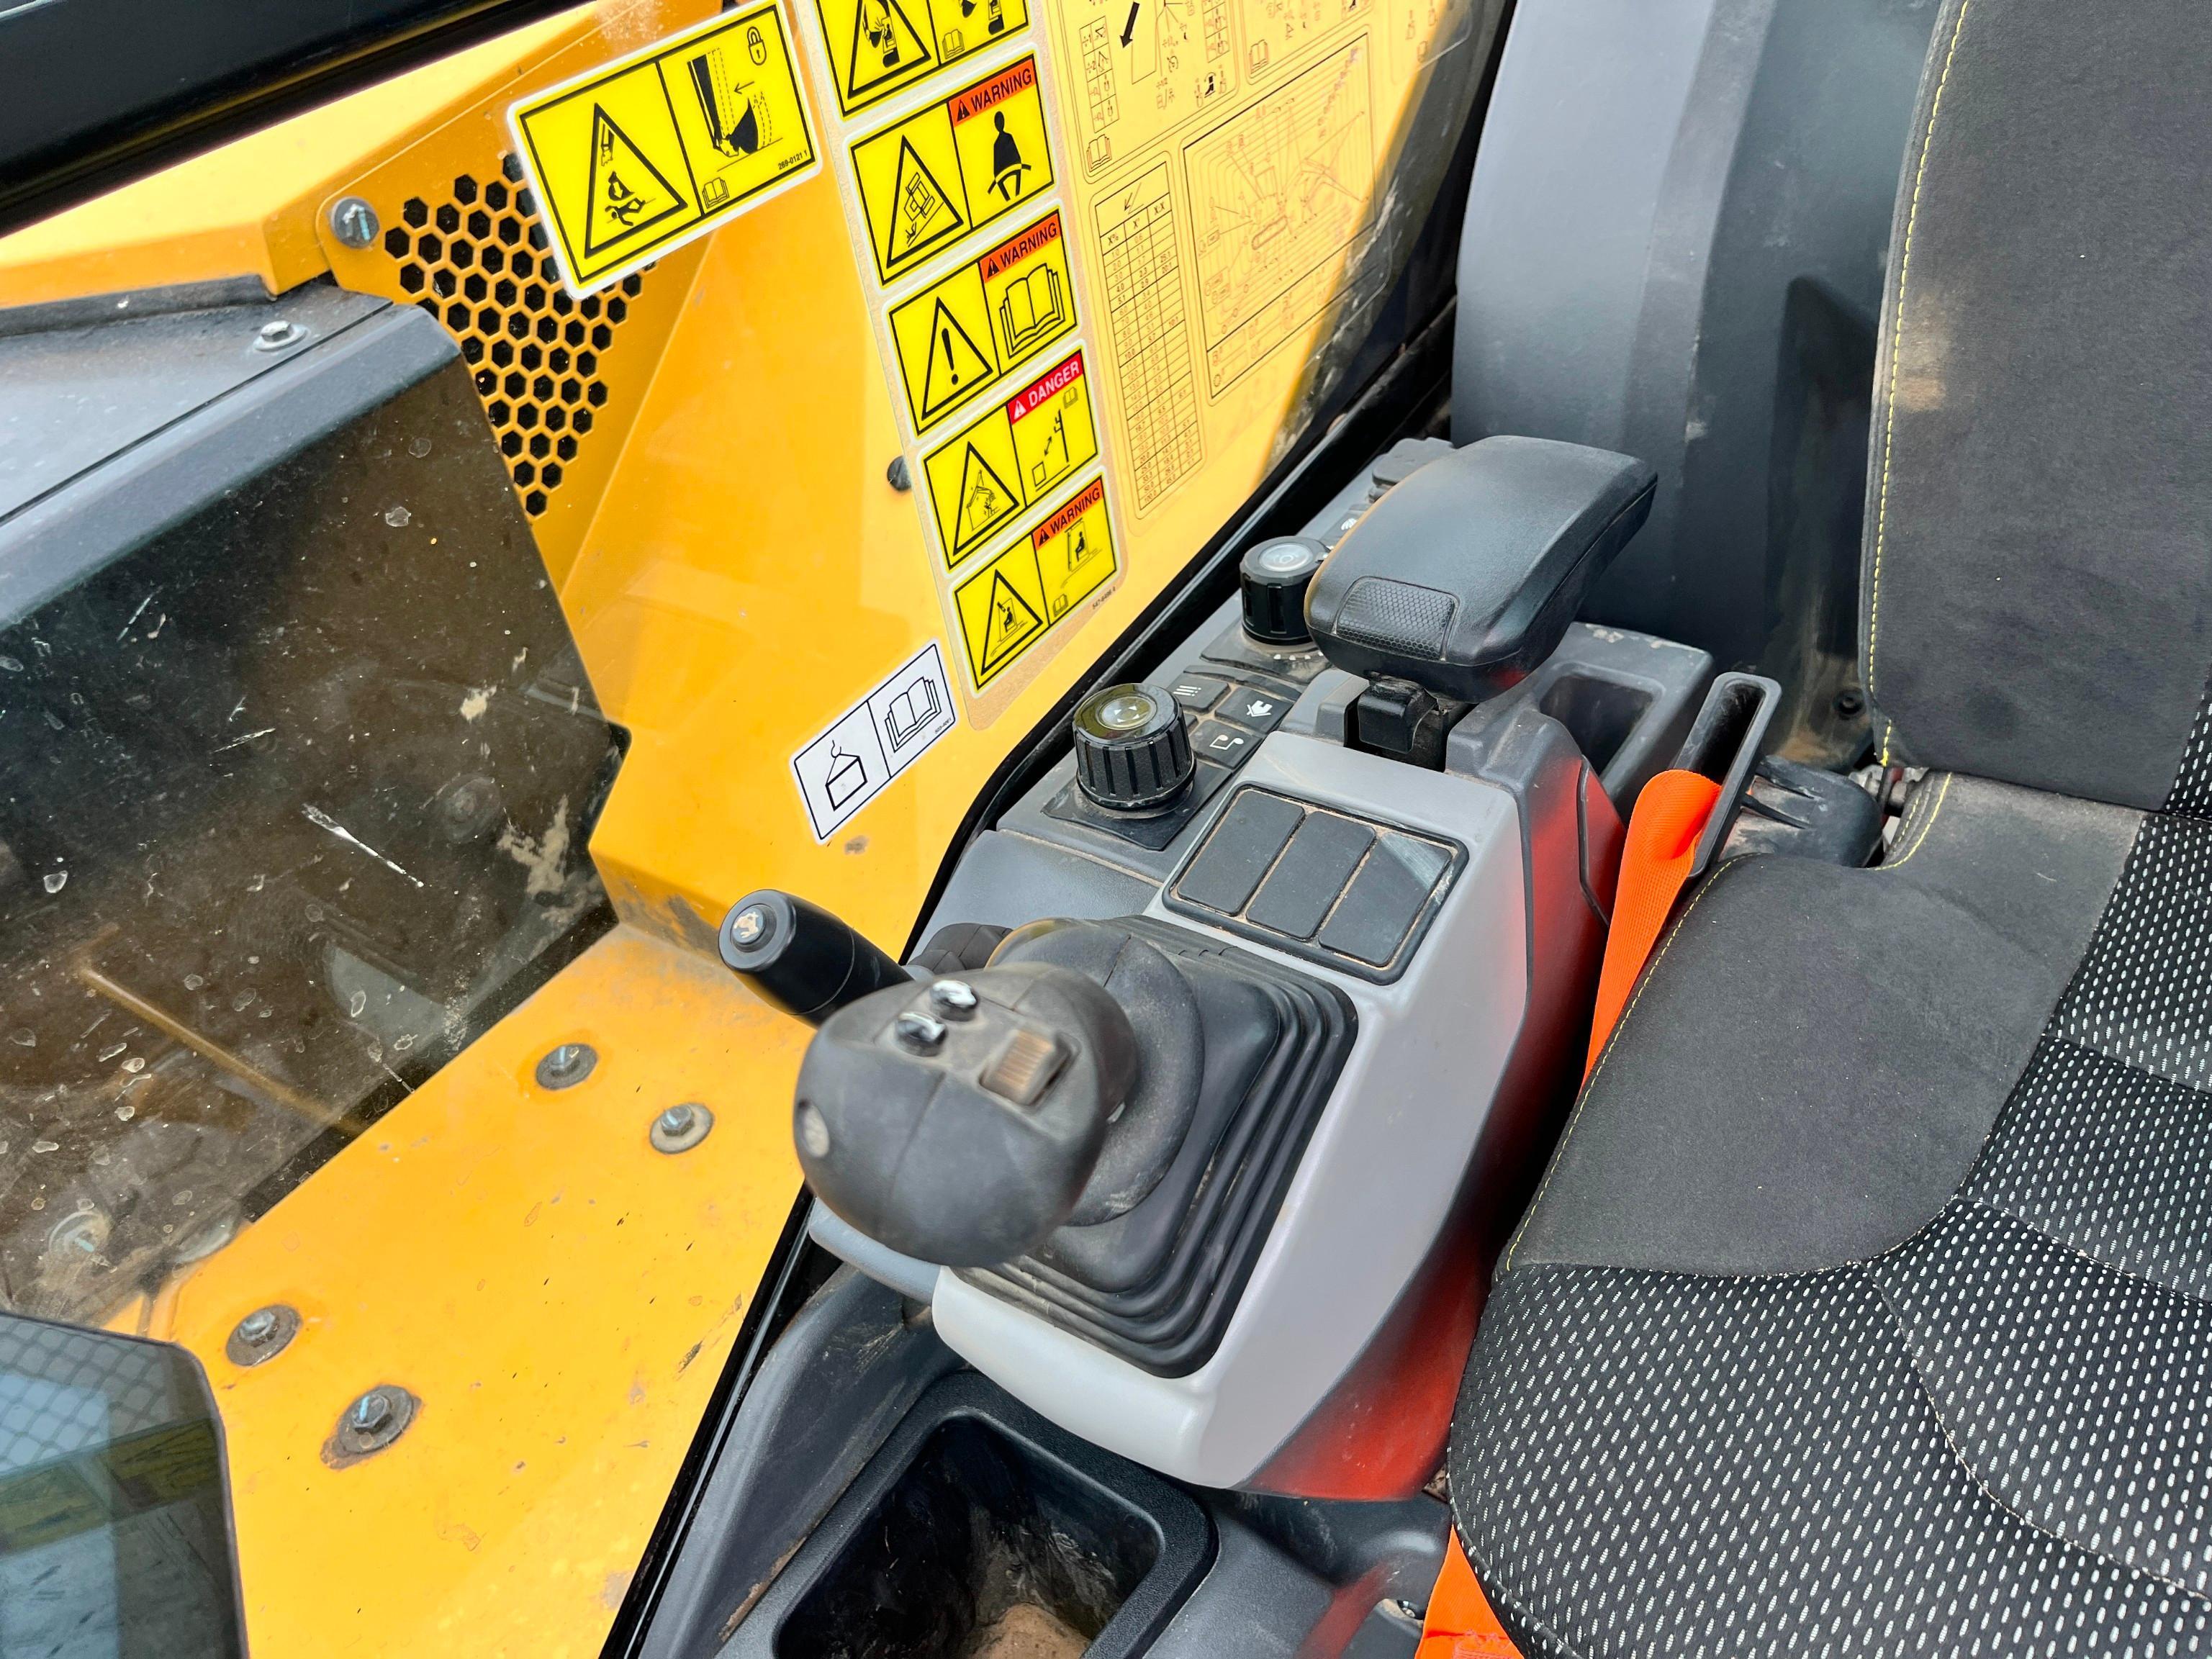 2023 CAT 308CR HYDRAULIC EXCAVATOR SN:807253 powered by Cat C3.3B diesel engine, equipped with Cab,